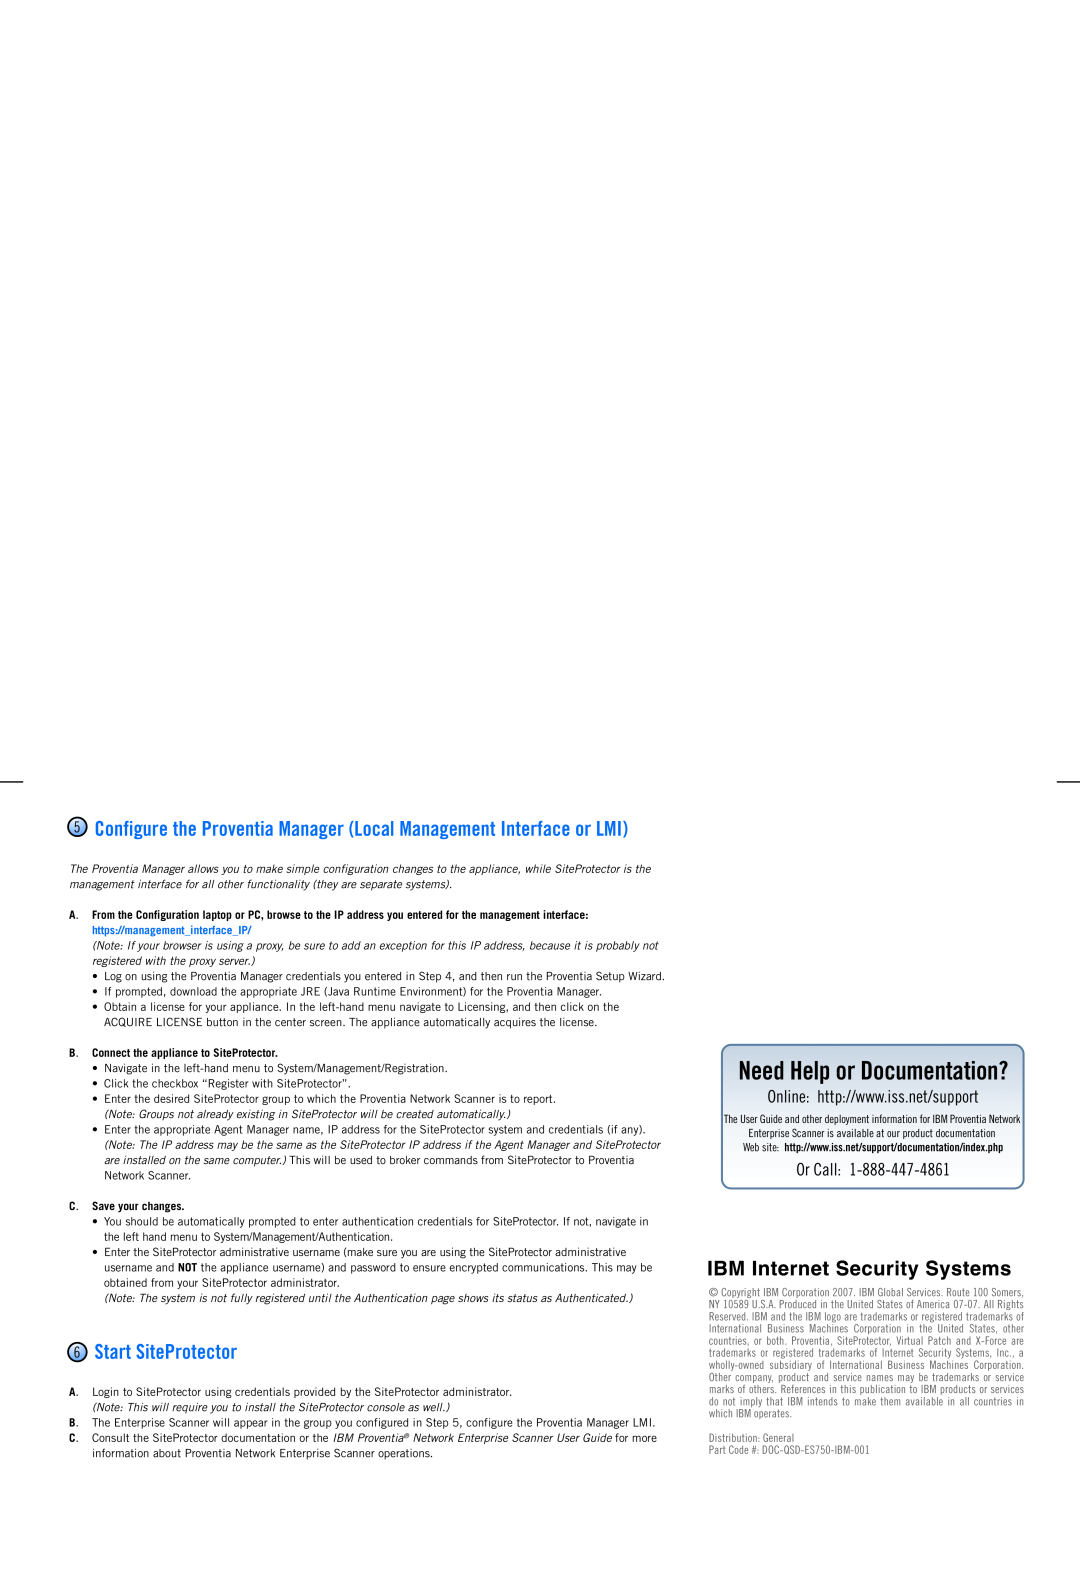 IBM ES750 manual Start SiteProtector, Need Help or Documentation?, Or Call, B. Connect the appliance to SiteProtector 